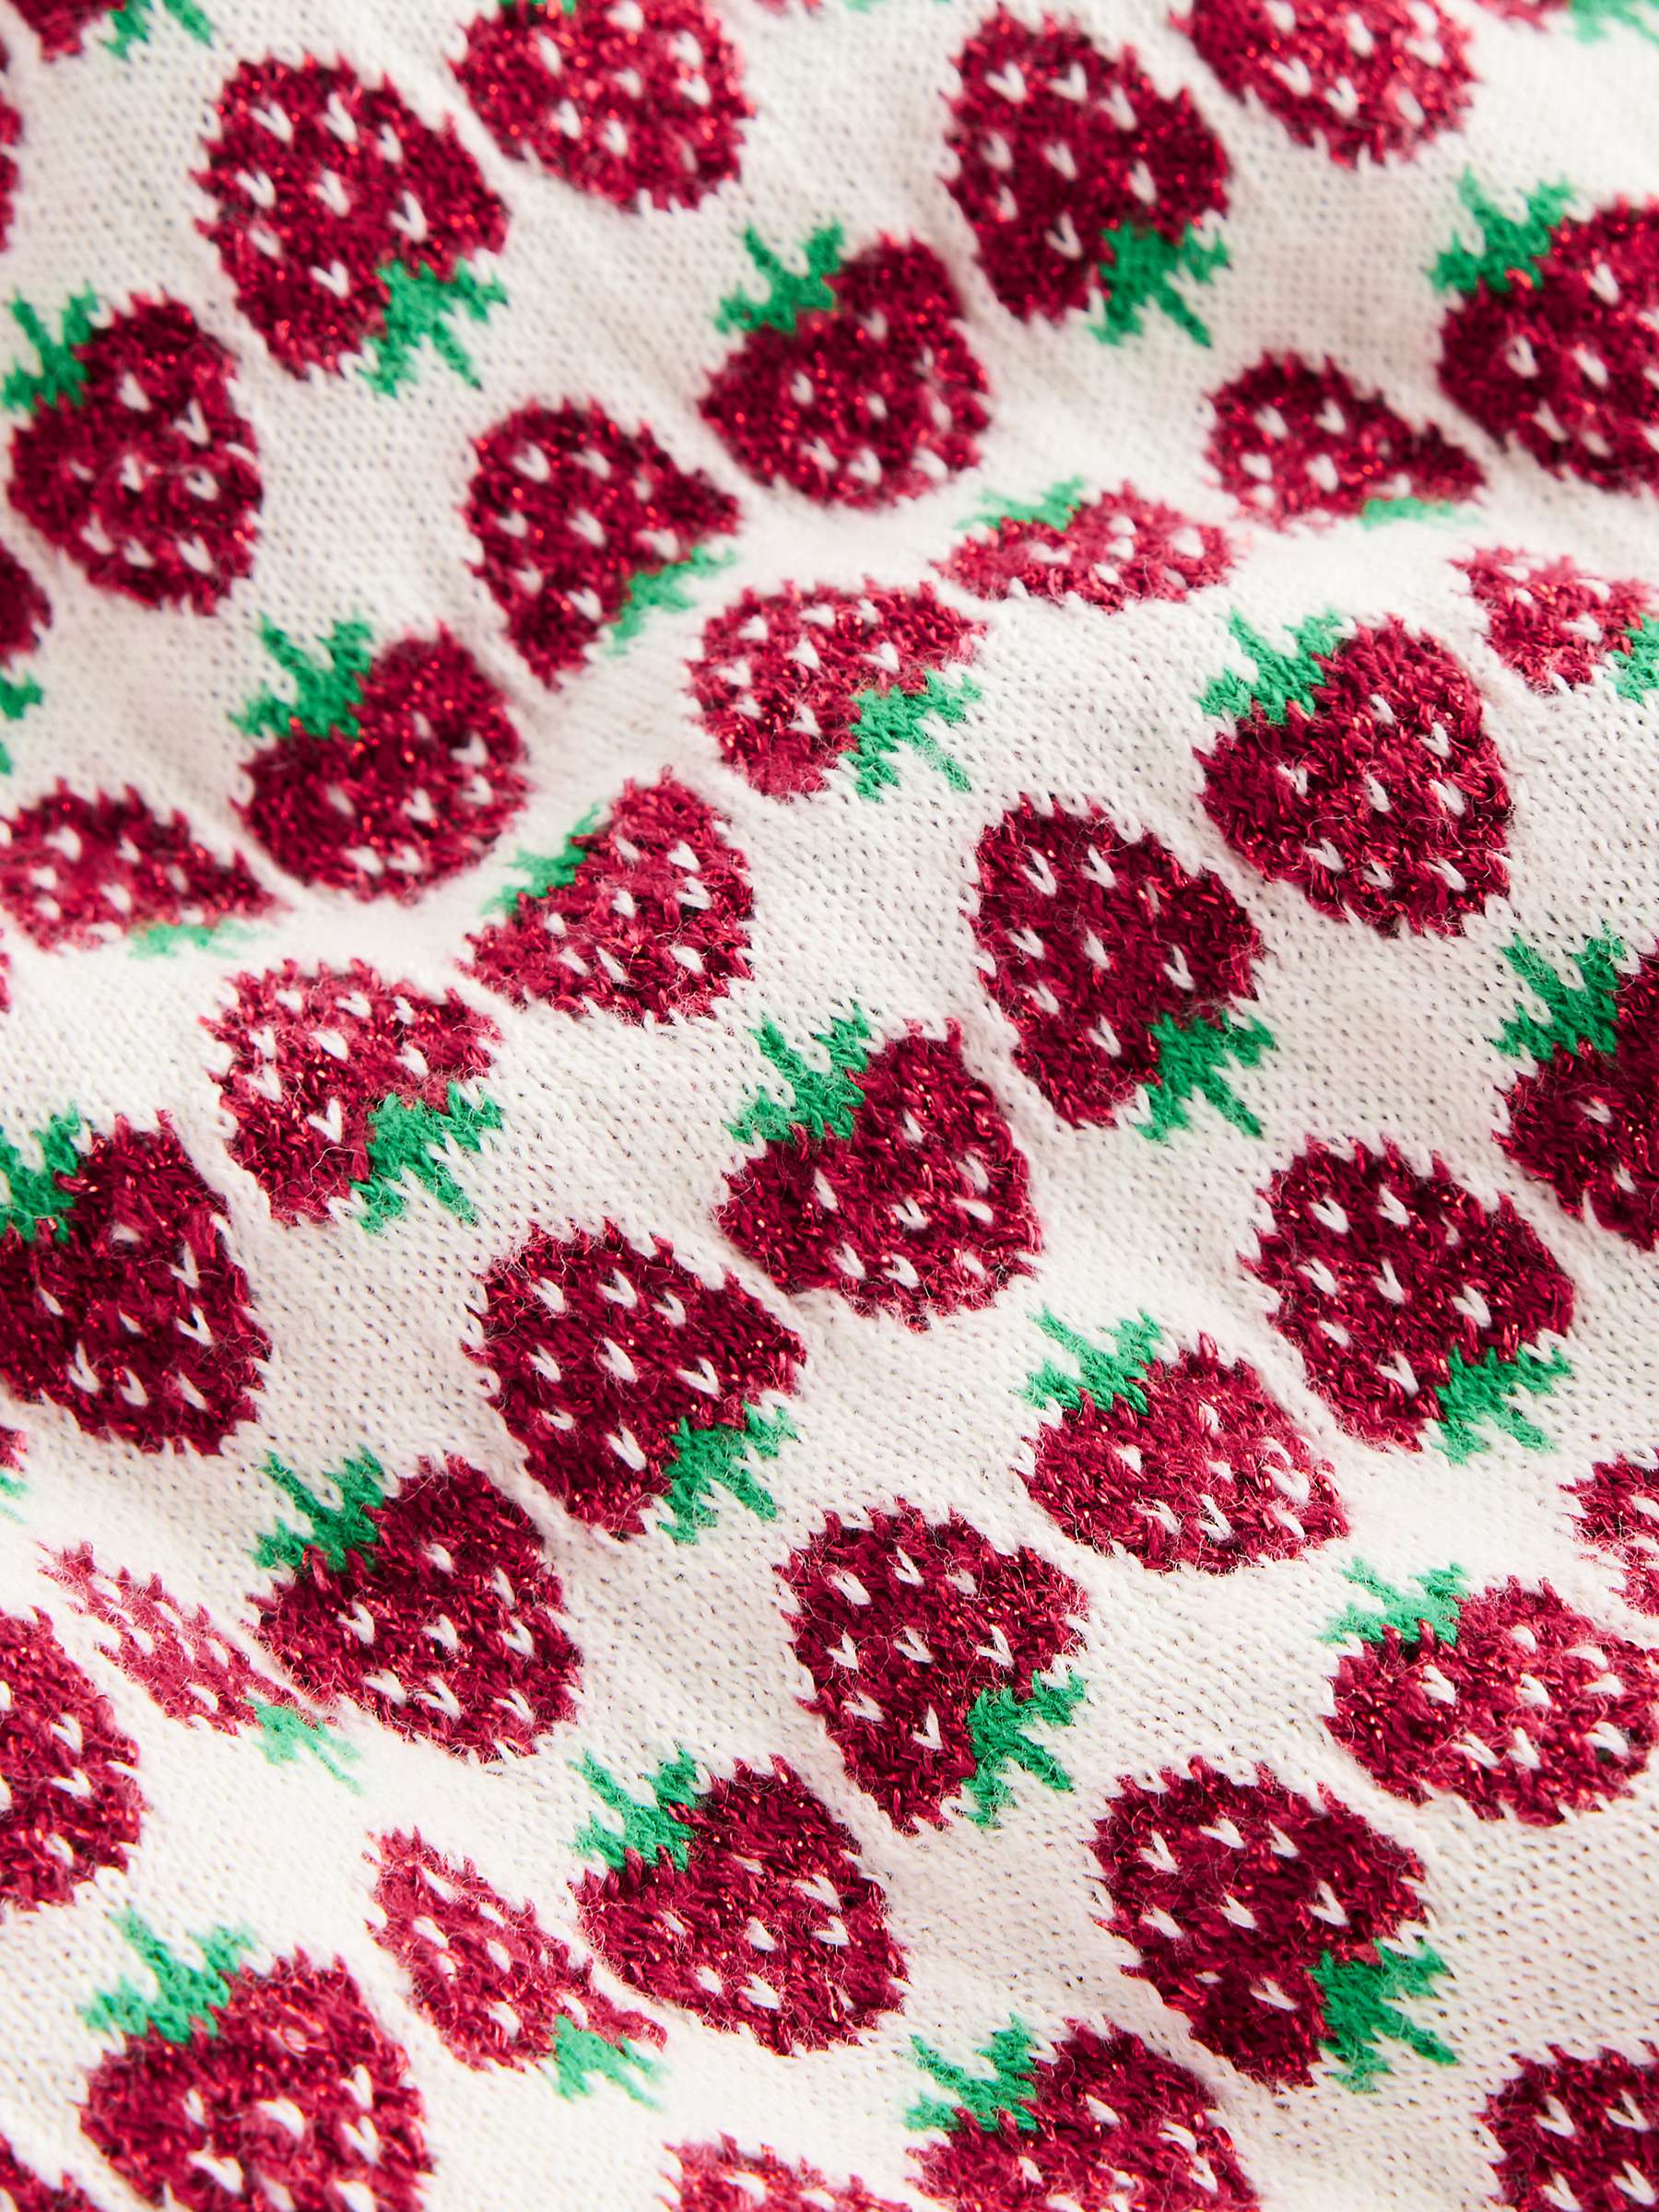 Buy Boden Sparkle Strawberry Fair Isle Knit Tank Top, Multi Online at johnlewis.com